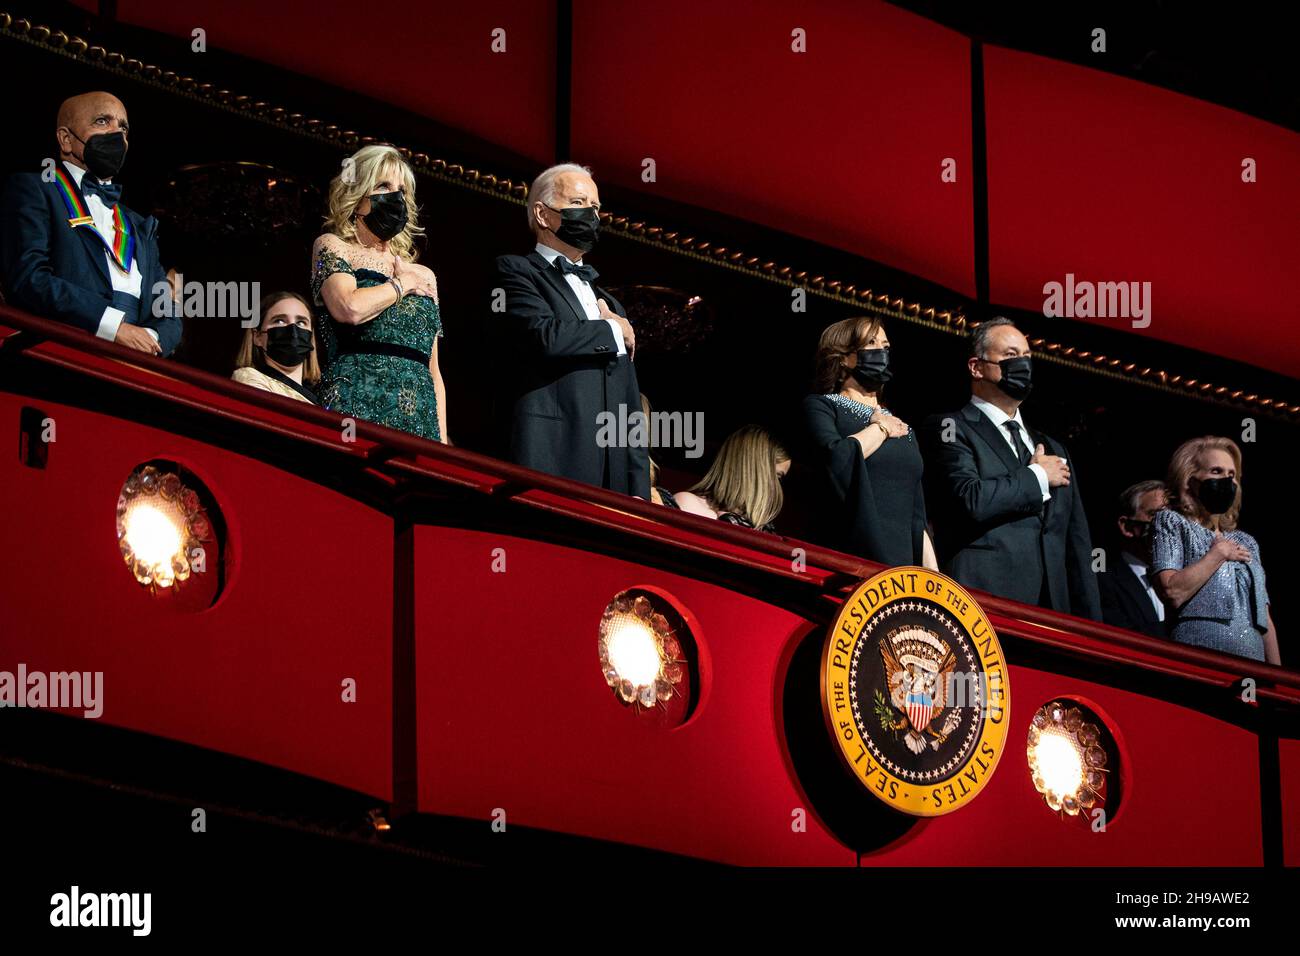 U.S. President Joe Biden, U.S. First Lady Jill Biden, U.S. Vice President Kamala Harris, and Second Gentleman Douglas Emhoff stand for the National Anthem during the 44th Kennedy Center Honors at the John F. Kennedy Center for the Performing Arts in Washington, DC, U.S., on Sunday, Dec. 5, 2021. The 44th Honorees for lifetime artistic achievements include operatic bass-baritone Justino Diaz, Motown founder Berry Gordy, Saturday Night Live creator Lorne Michaels, actress Bette Midler, and singer-songwriter Joni Mitchell. Photographer: Al Drago/BloombergCredit: Al Drago/Pool via CNP /MediaPu Stock Photo